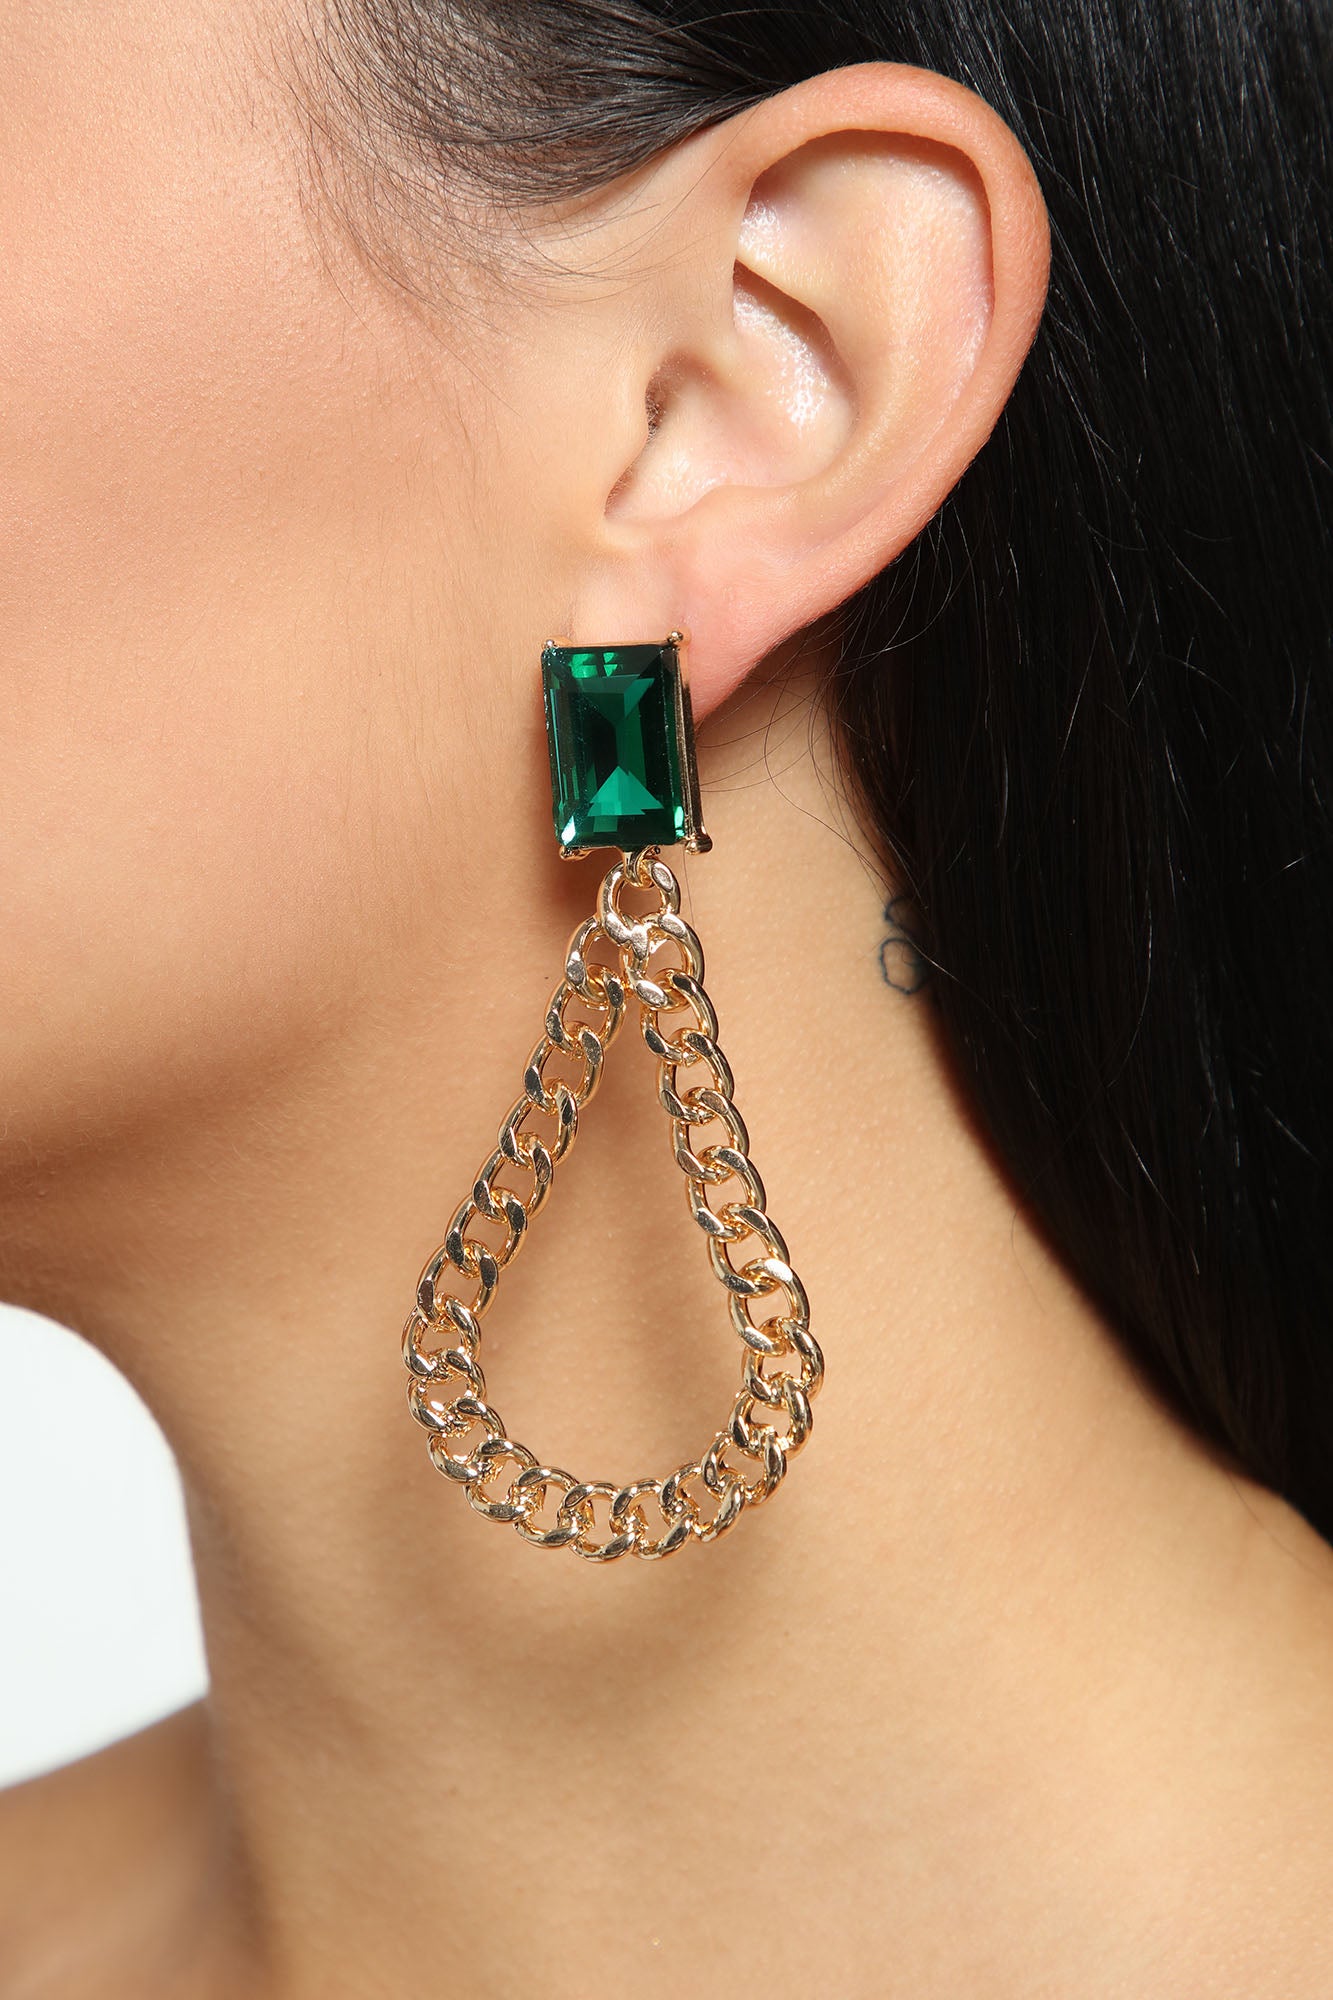 Off The Chain Earrings - Green